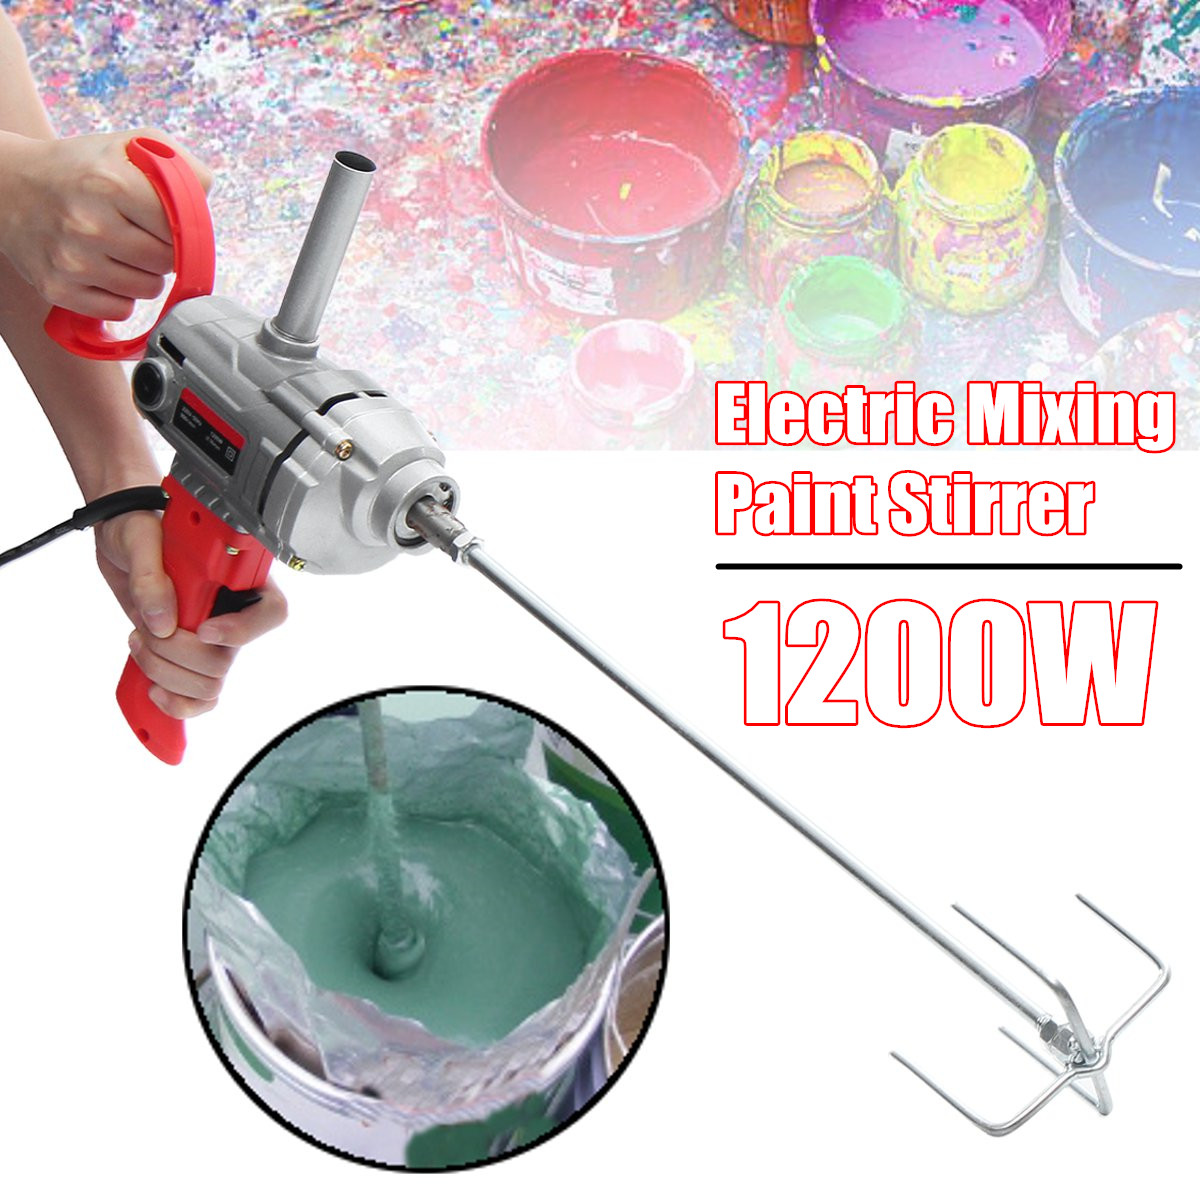 1200W-Electric-Plaster-Mixing-Paintings-Stirrer-Home-Paint-Latex-Putty-Powder-Paddle-Mixer-1320616-1